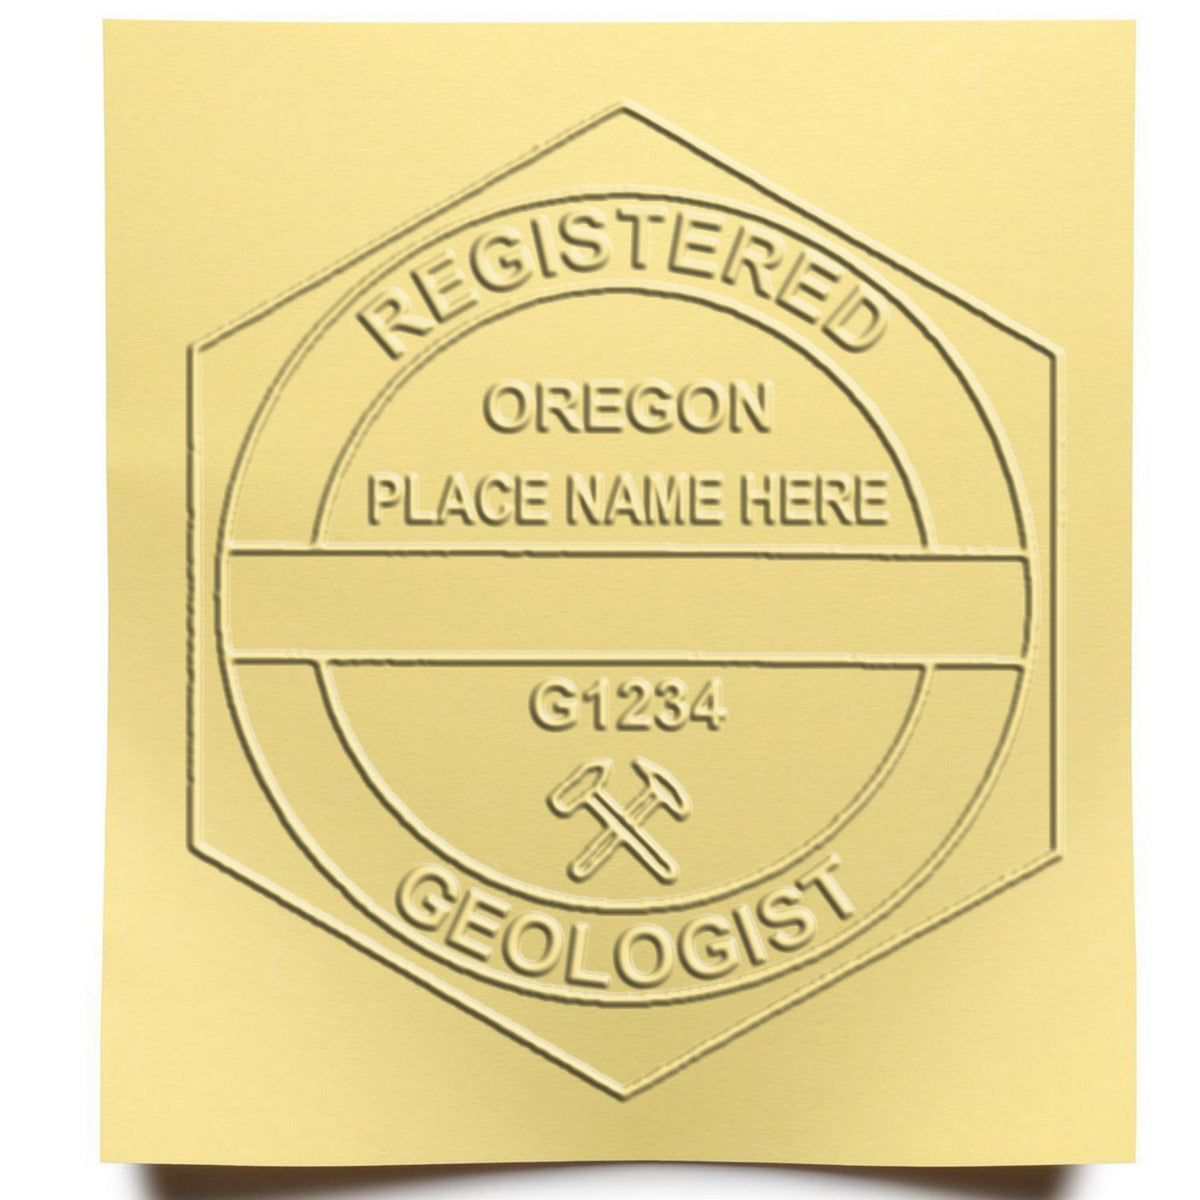 An in use photo of the Long Reach Oregon Geology Seal showing a sample imprint on a cardstock